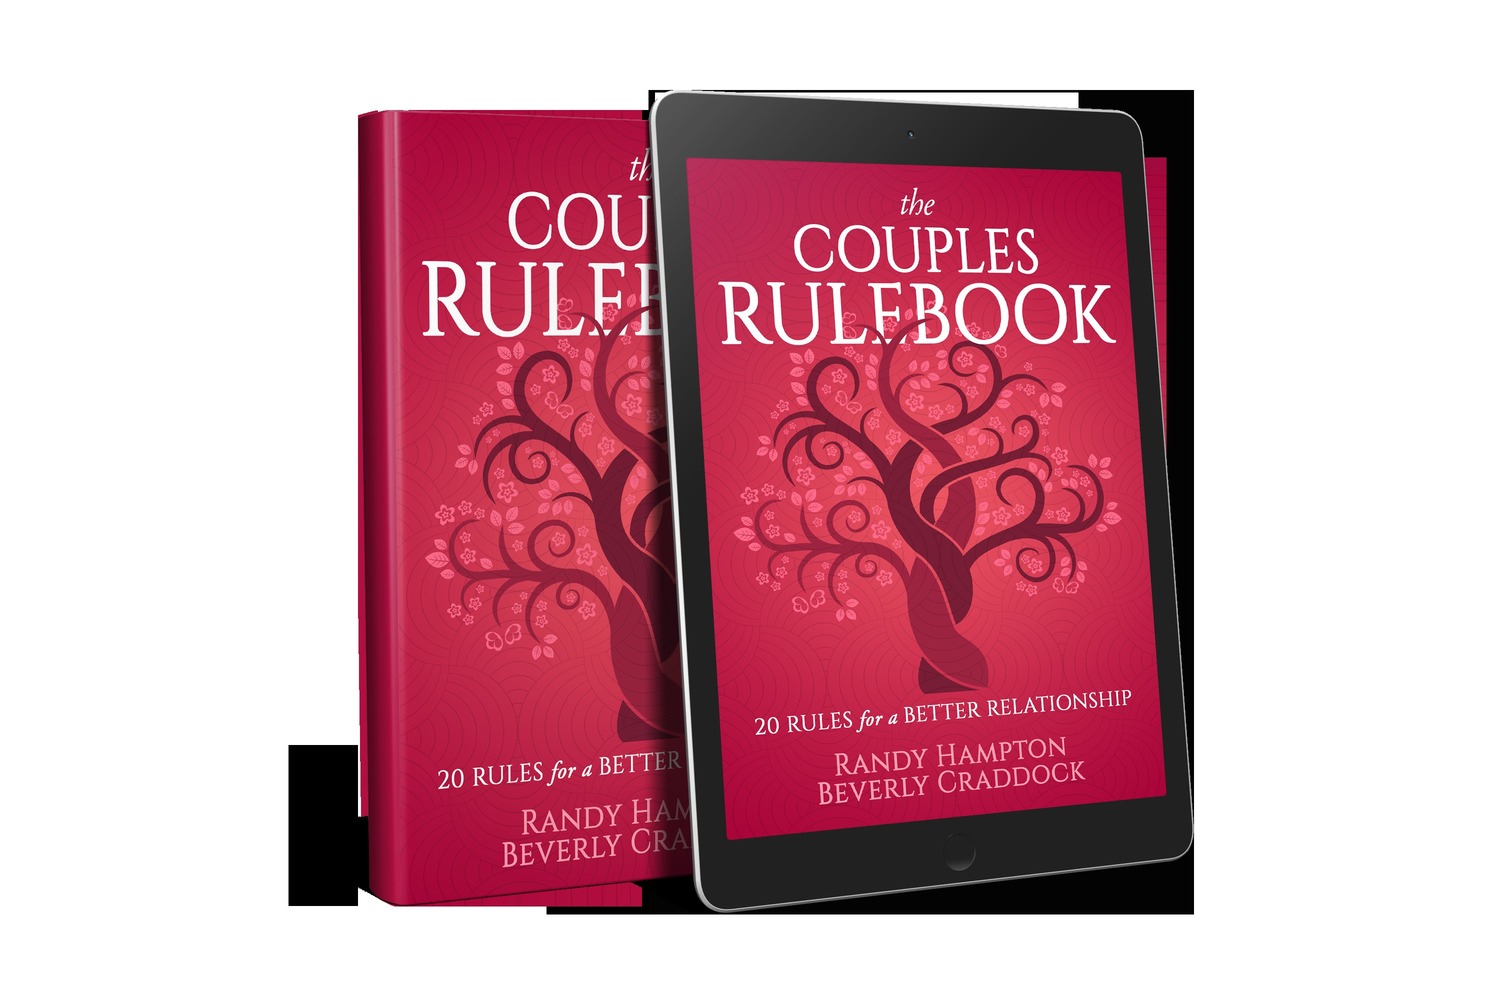 Gallery Photo of We wrote this book in 2019 to help couples understand the real issues in relationships.